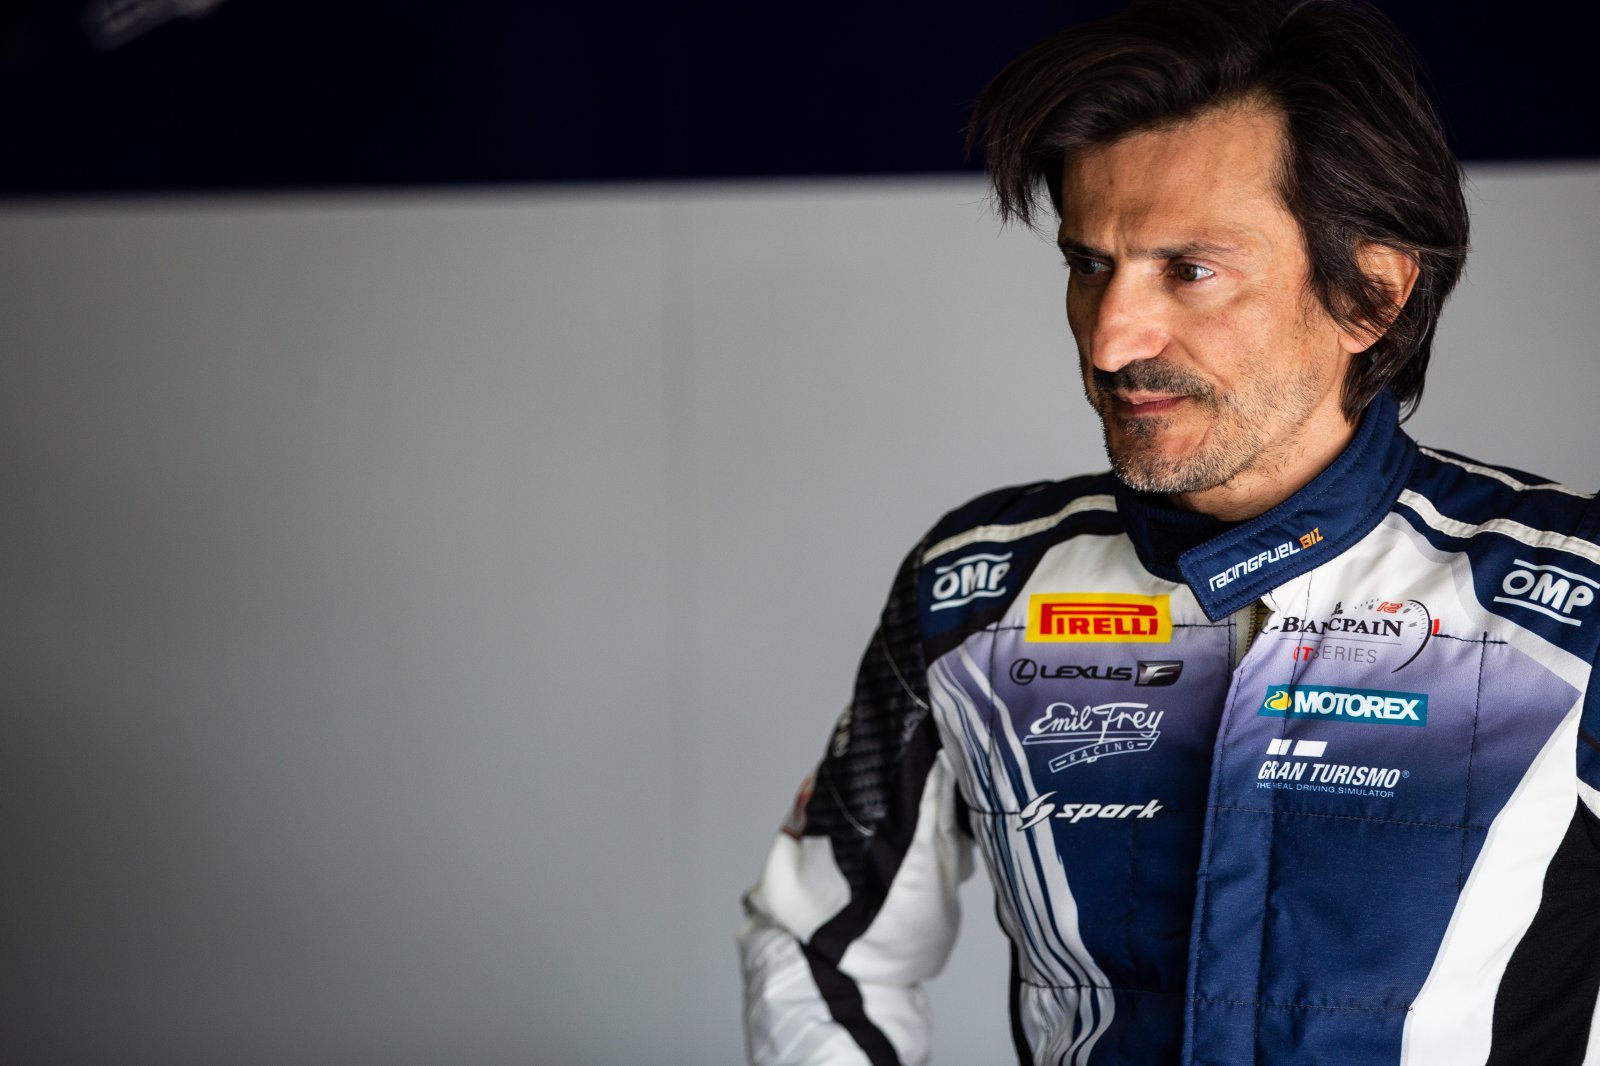 In Profile: Stephane Ortelli’s Life Behind the Wheel